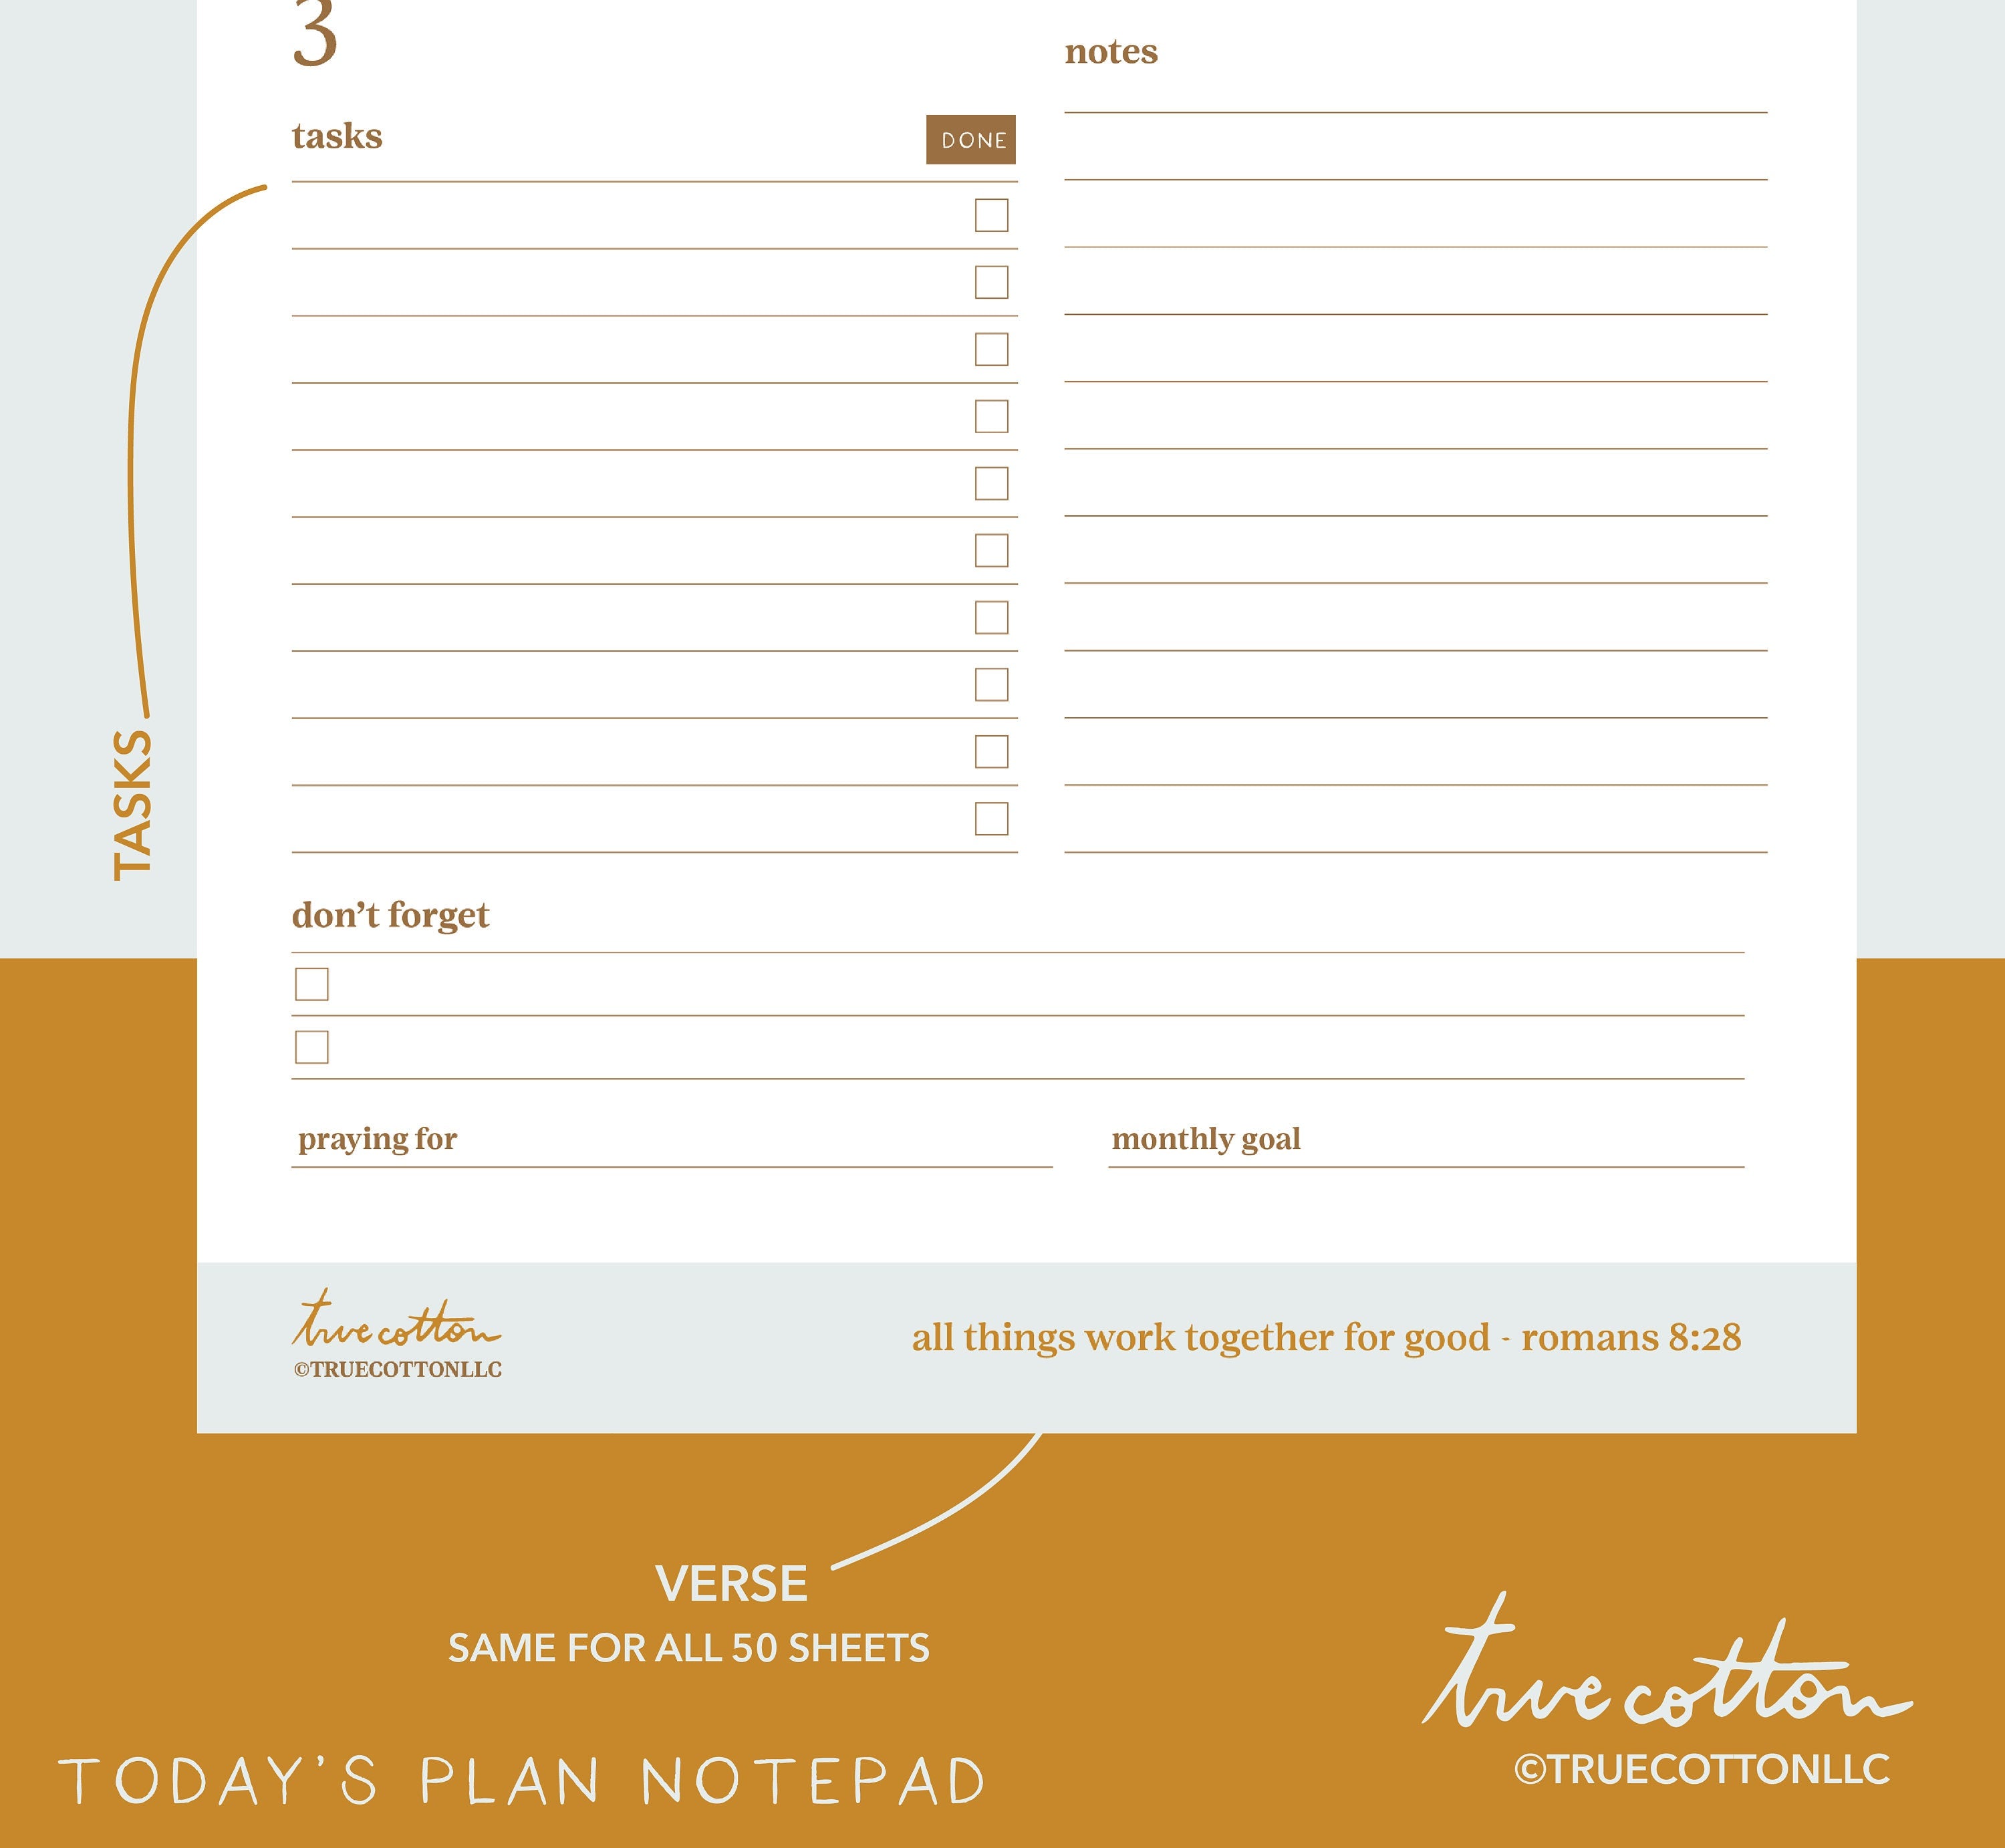 Today's Plan | Daily notepad | To do list notepad | Daily organizer | Thankful List | Prayer List | Scripture Christian Notepad